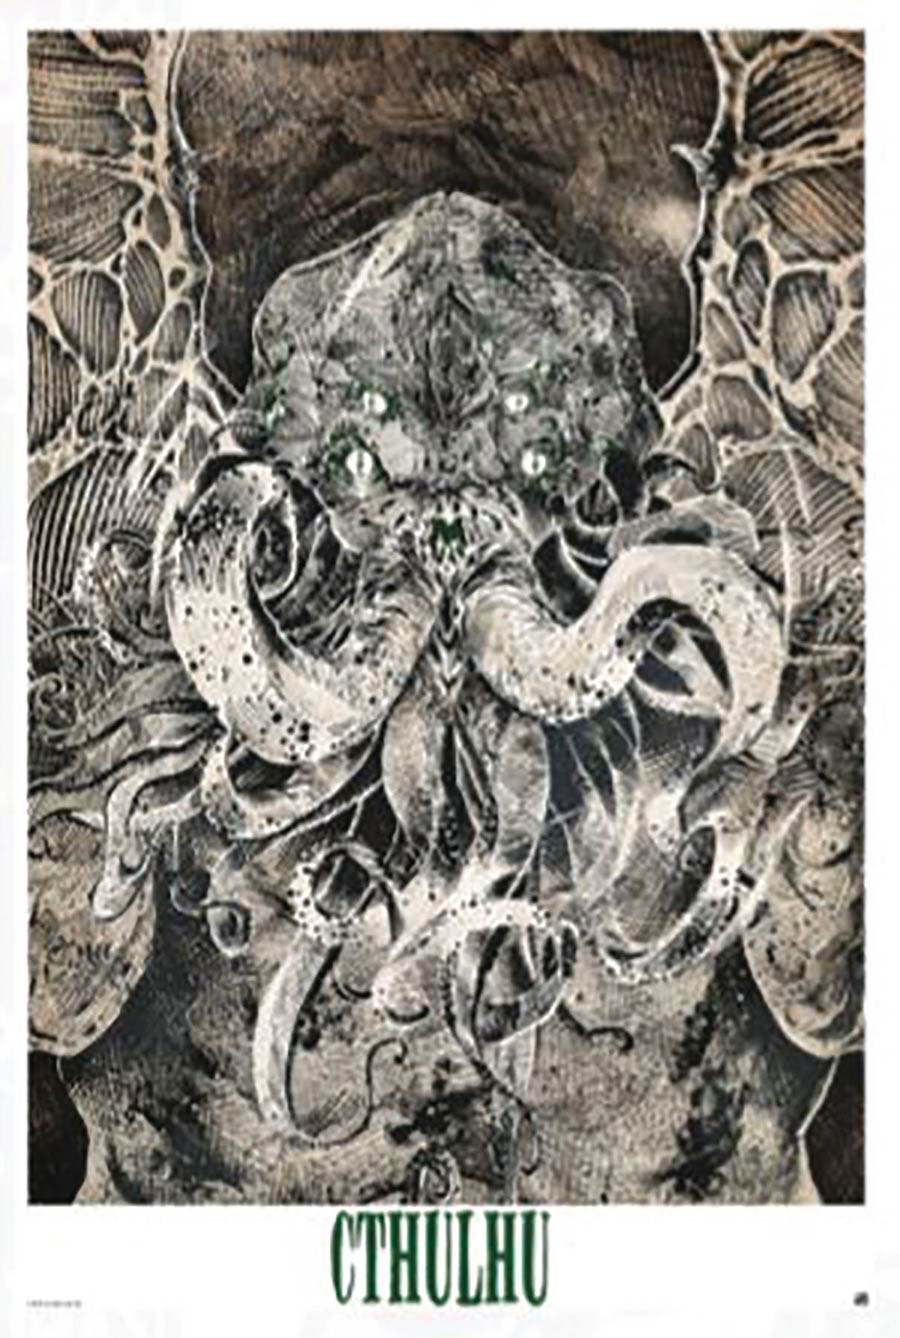 Cthulhu 24 x 36 Inch Poster